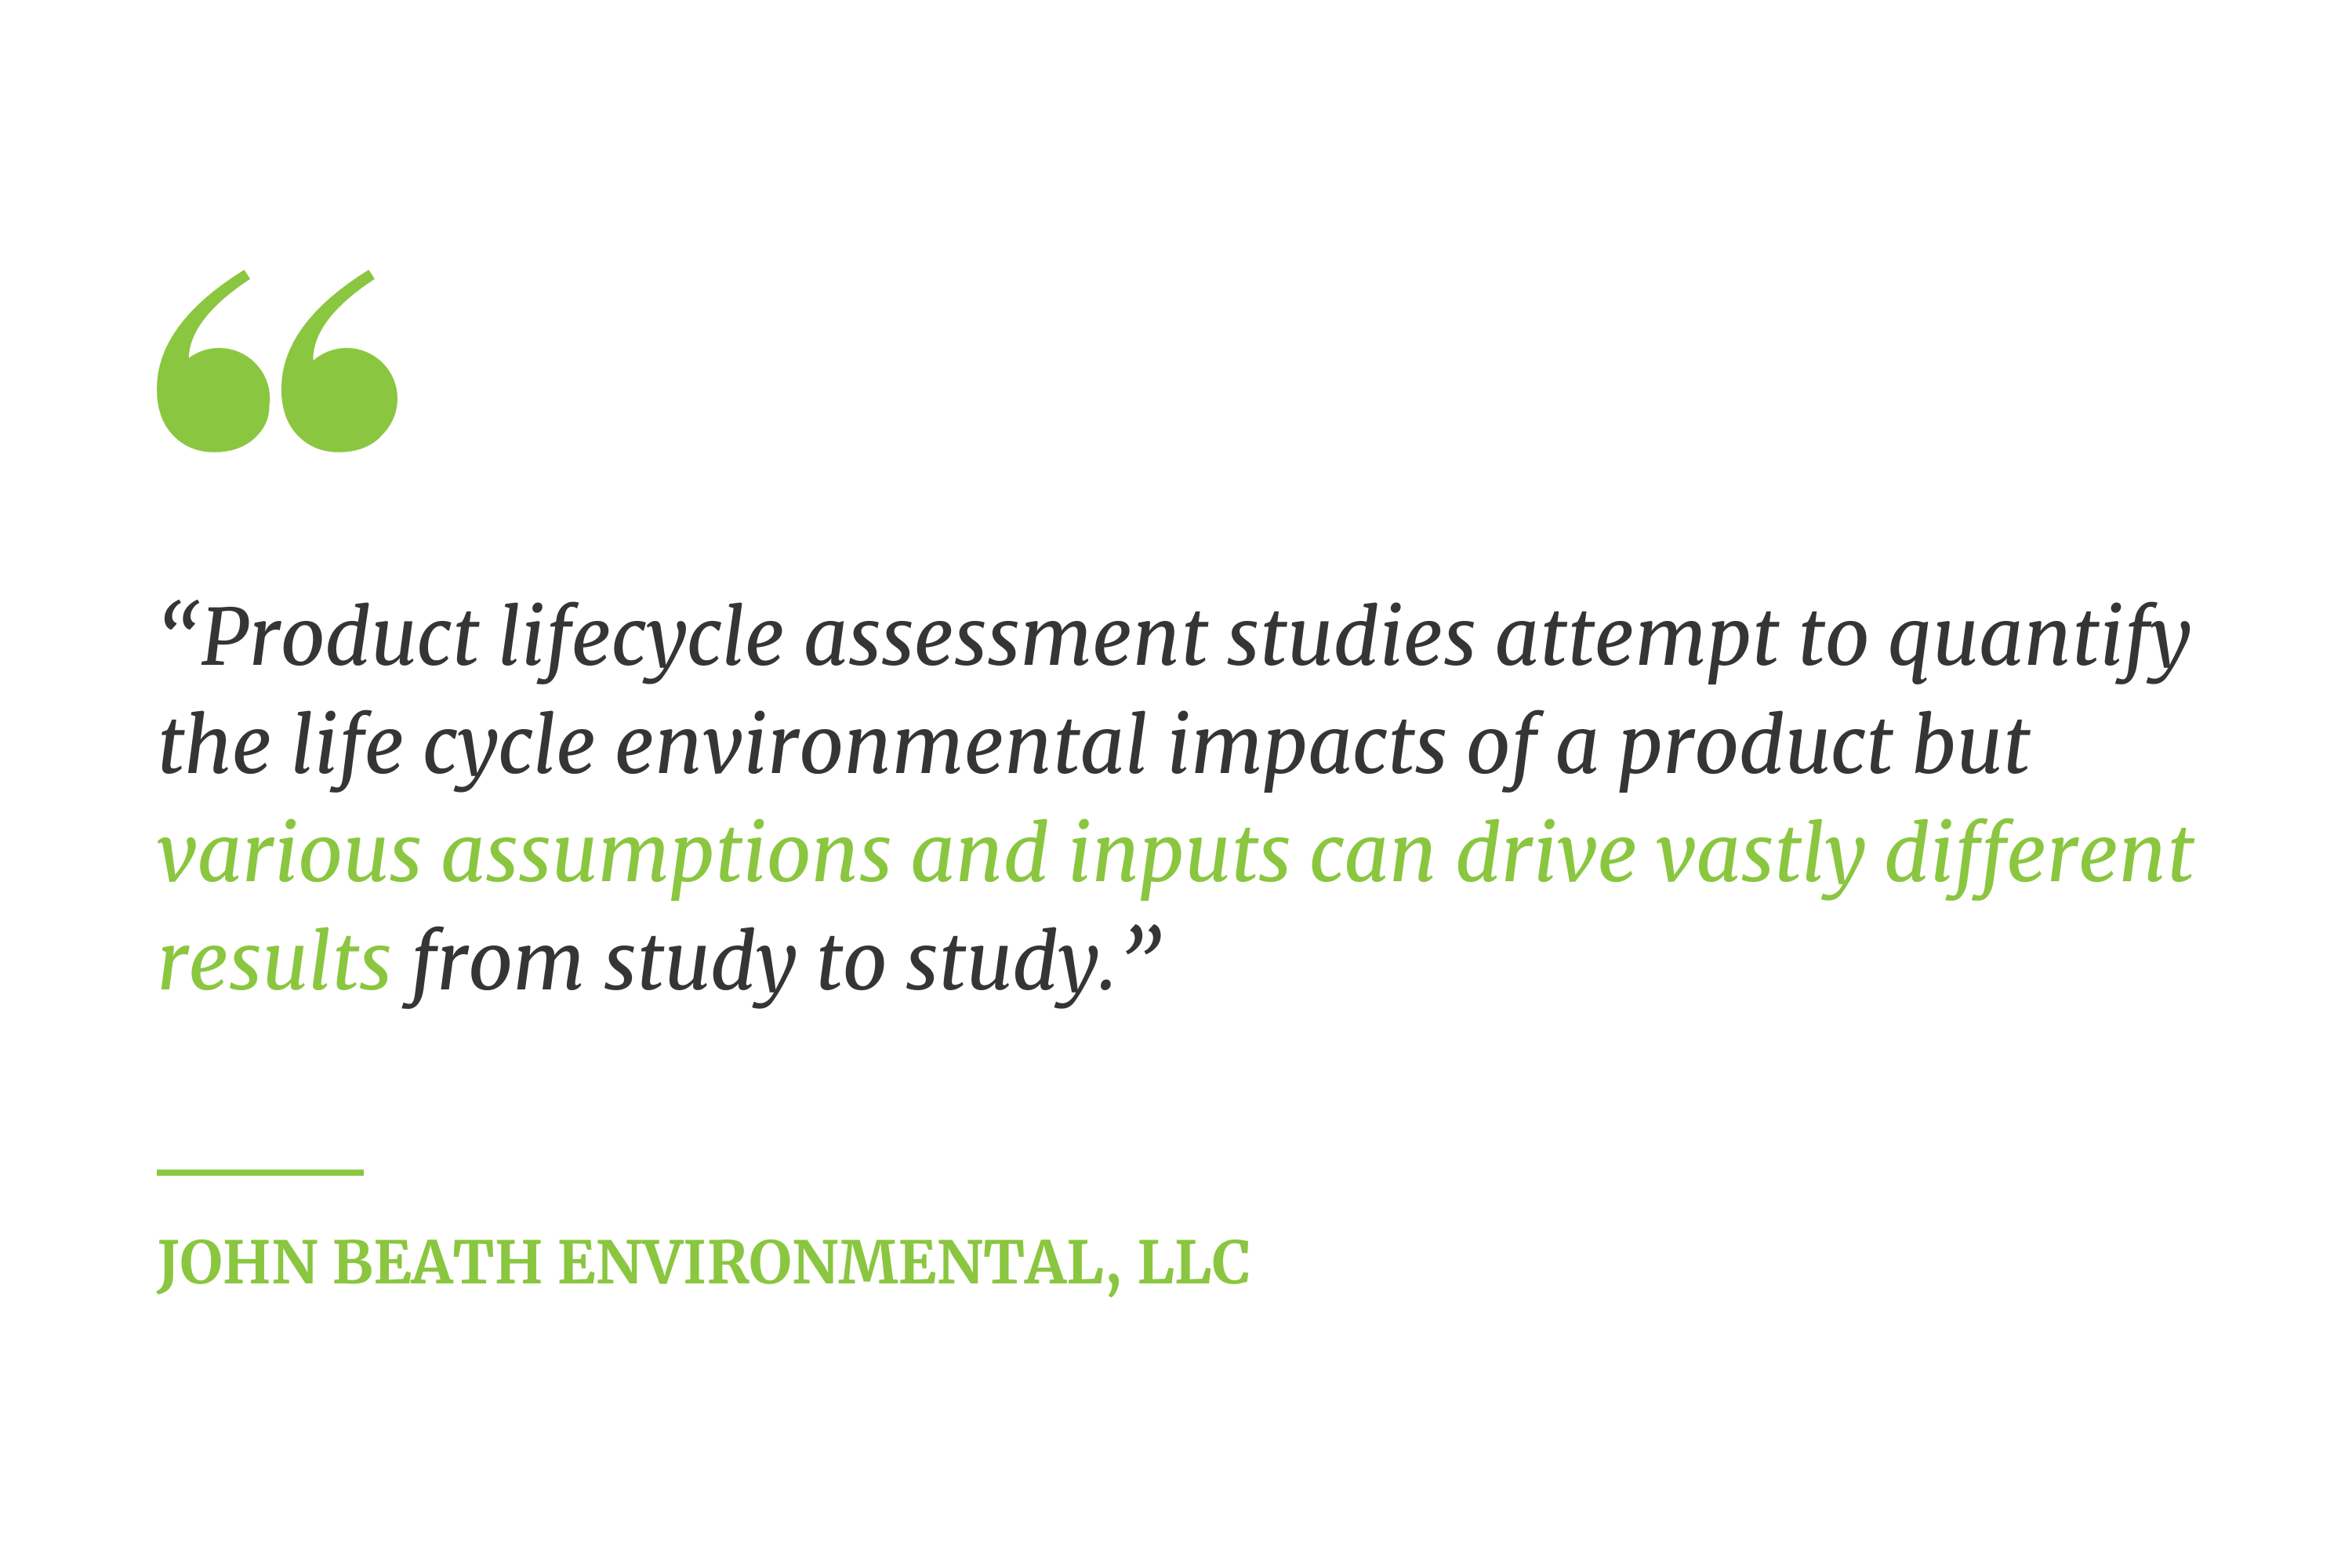 “Product lifecycle assessment studies attempt to quantify the life cycle environmental impacts of a product but various assumptions and inputs can drive vastly different results from study to study.” --  John Beath Environmental, LLC